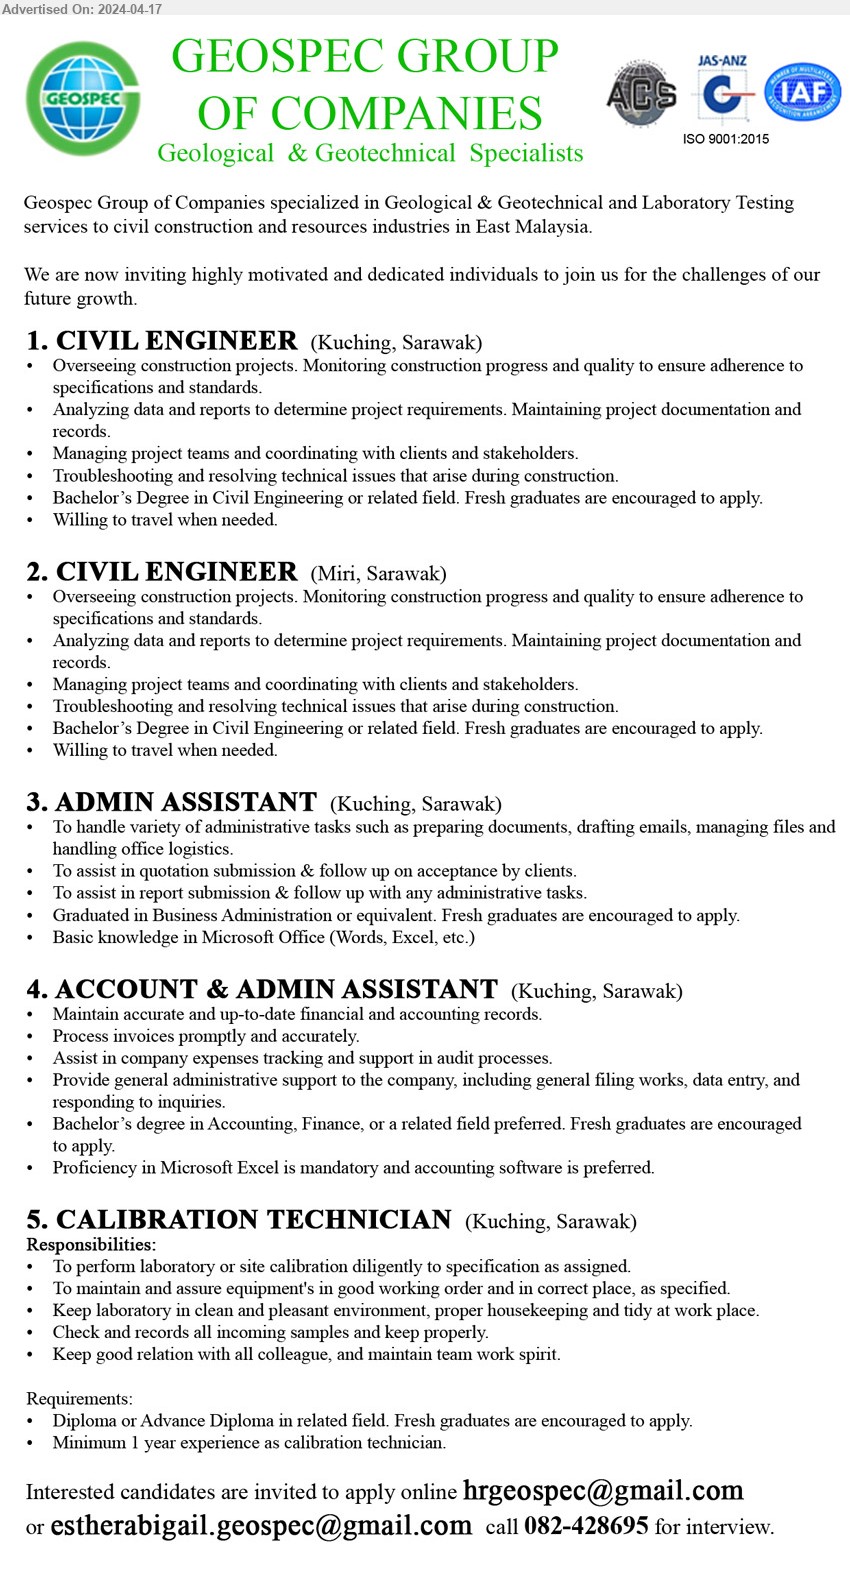 GEOSPEC GROUP OF COMPANIES - 1. CIVIL ENGINEER (Kuching), Bachelor’s Degree in Civil Engineering or related field. Fresh graduates are encouraged to apply.,...
2. CIVIL ENGINEER  (Miri), Bachelor’s Degree in Civil Engineering or related field. Fresh graduates are encouraged to apply.,...
3. ADMIN ASSISTANT  (Kuching), Graduated in Business Administration or equivalent. Fresh graduates are encouraged to apply,...
4. ACCOUNT & ADMIN ASSISTANT (Kuching), Bachelor’s degree in Accounting, Finance, or a related field preferred. Fresh graduates are encouraged to apply.,...
5. CALIBRATION TECHNICIAN  (Kuching), Diploma or Advance Diploma in related field. Fresh graduates are encouraged to apply....
Call 082-428695  / Email resume to ...
